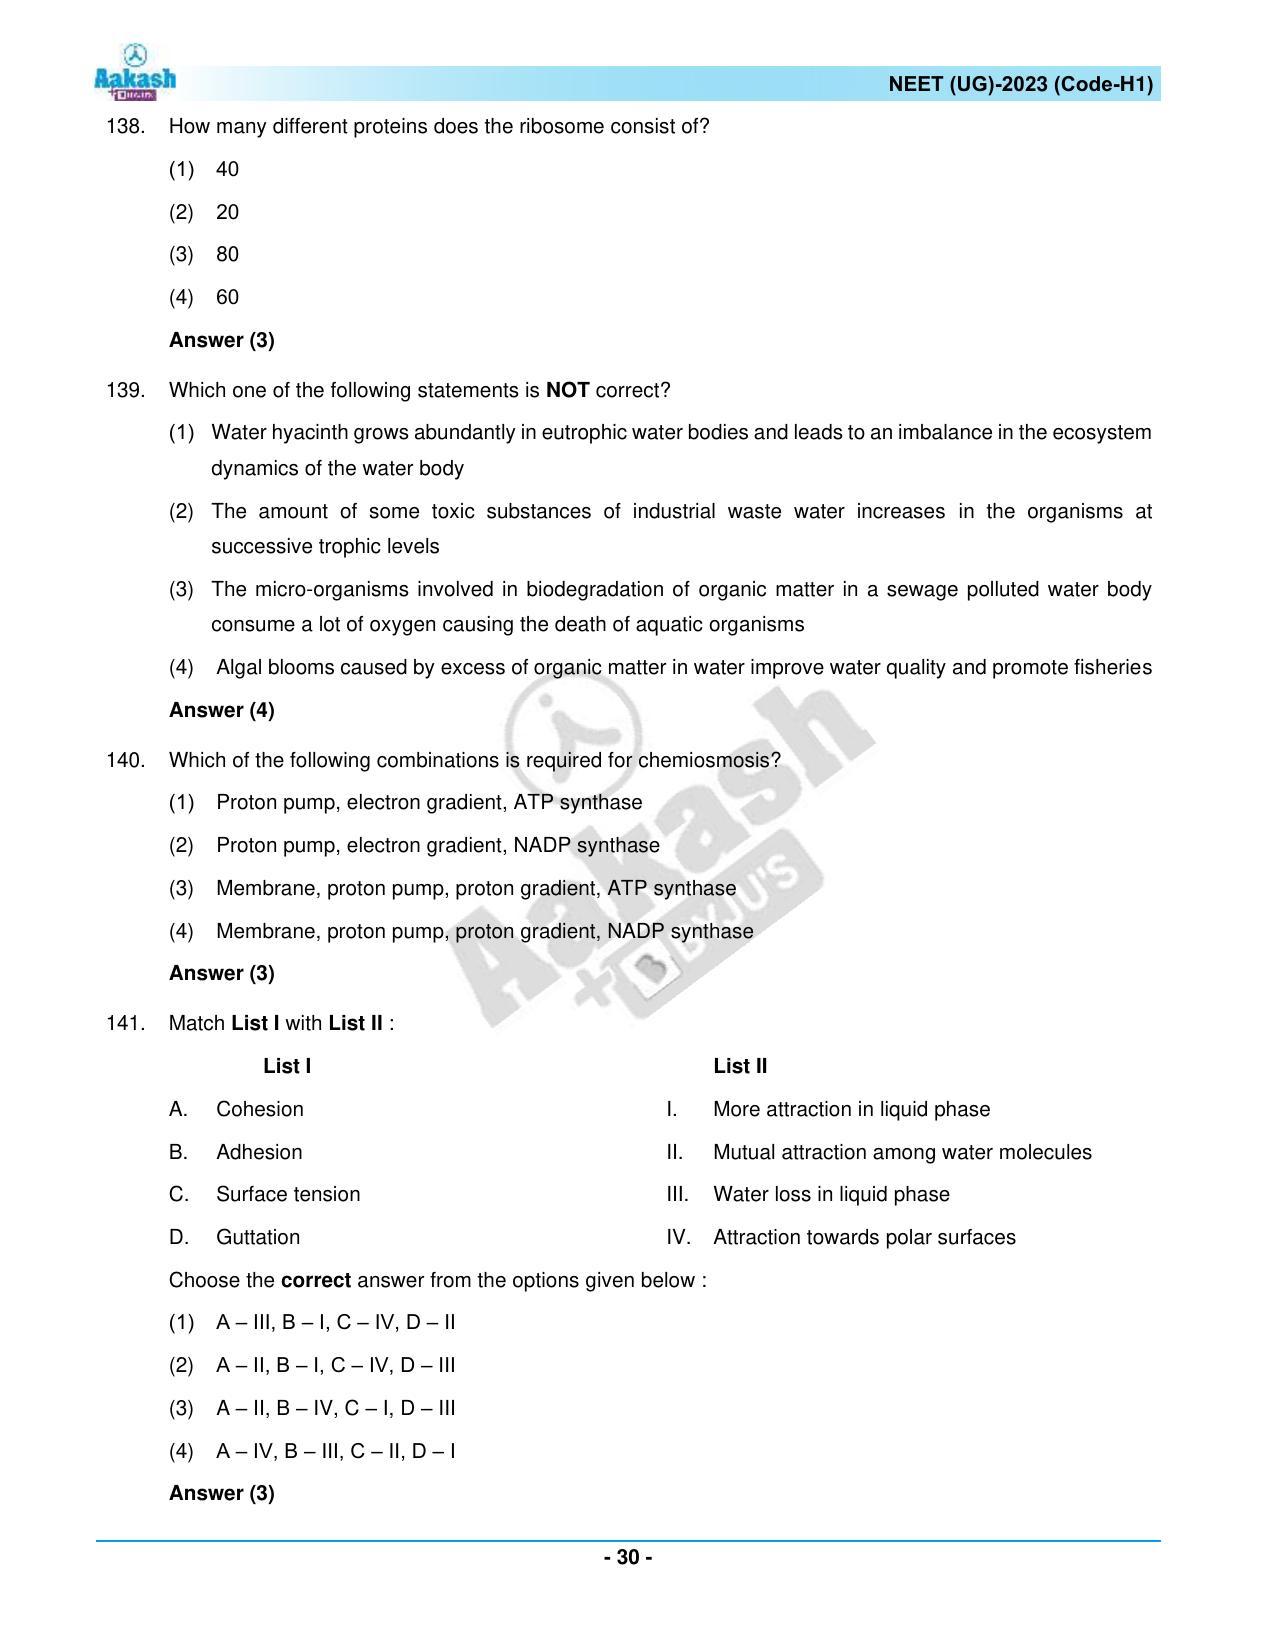 NEET 2023 Question Paper H1 - Page 30